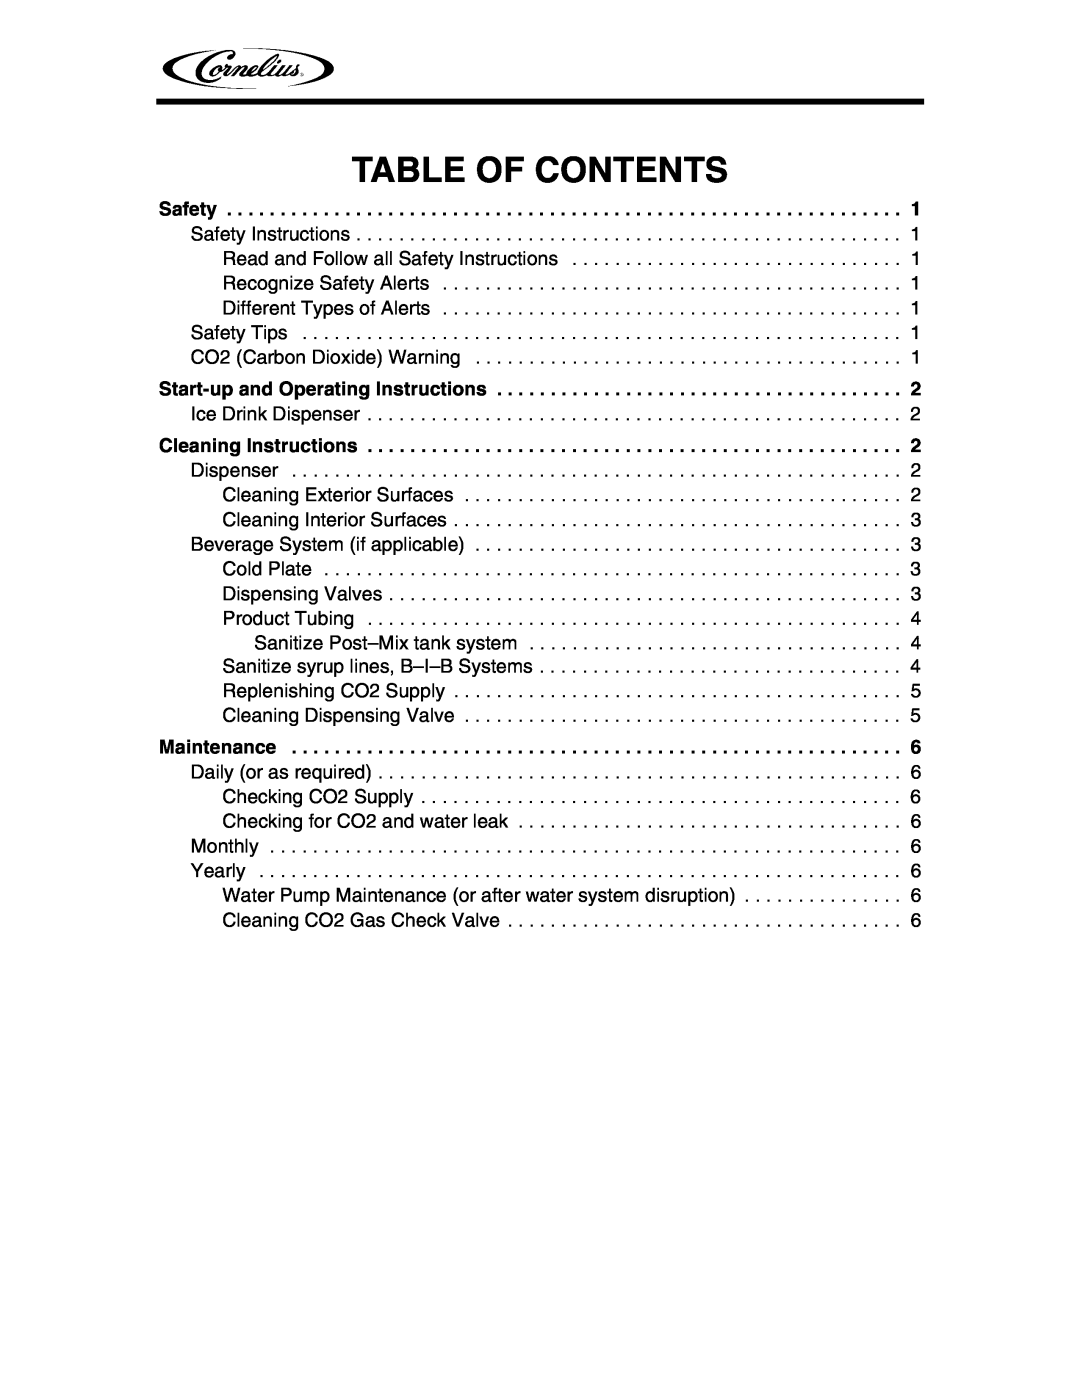 Cornelius IDC 2XX manual Table Of Contents, Safety, Start-up and Operating Instructions, Cleaning Instructions, Maintenance 